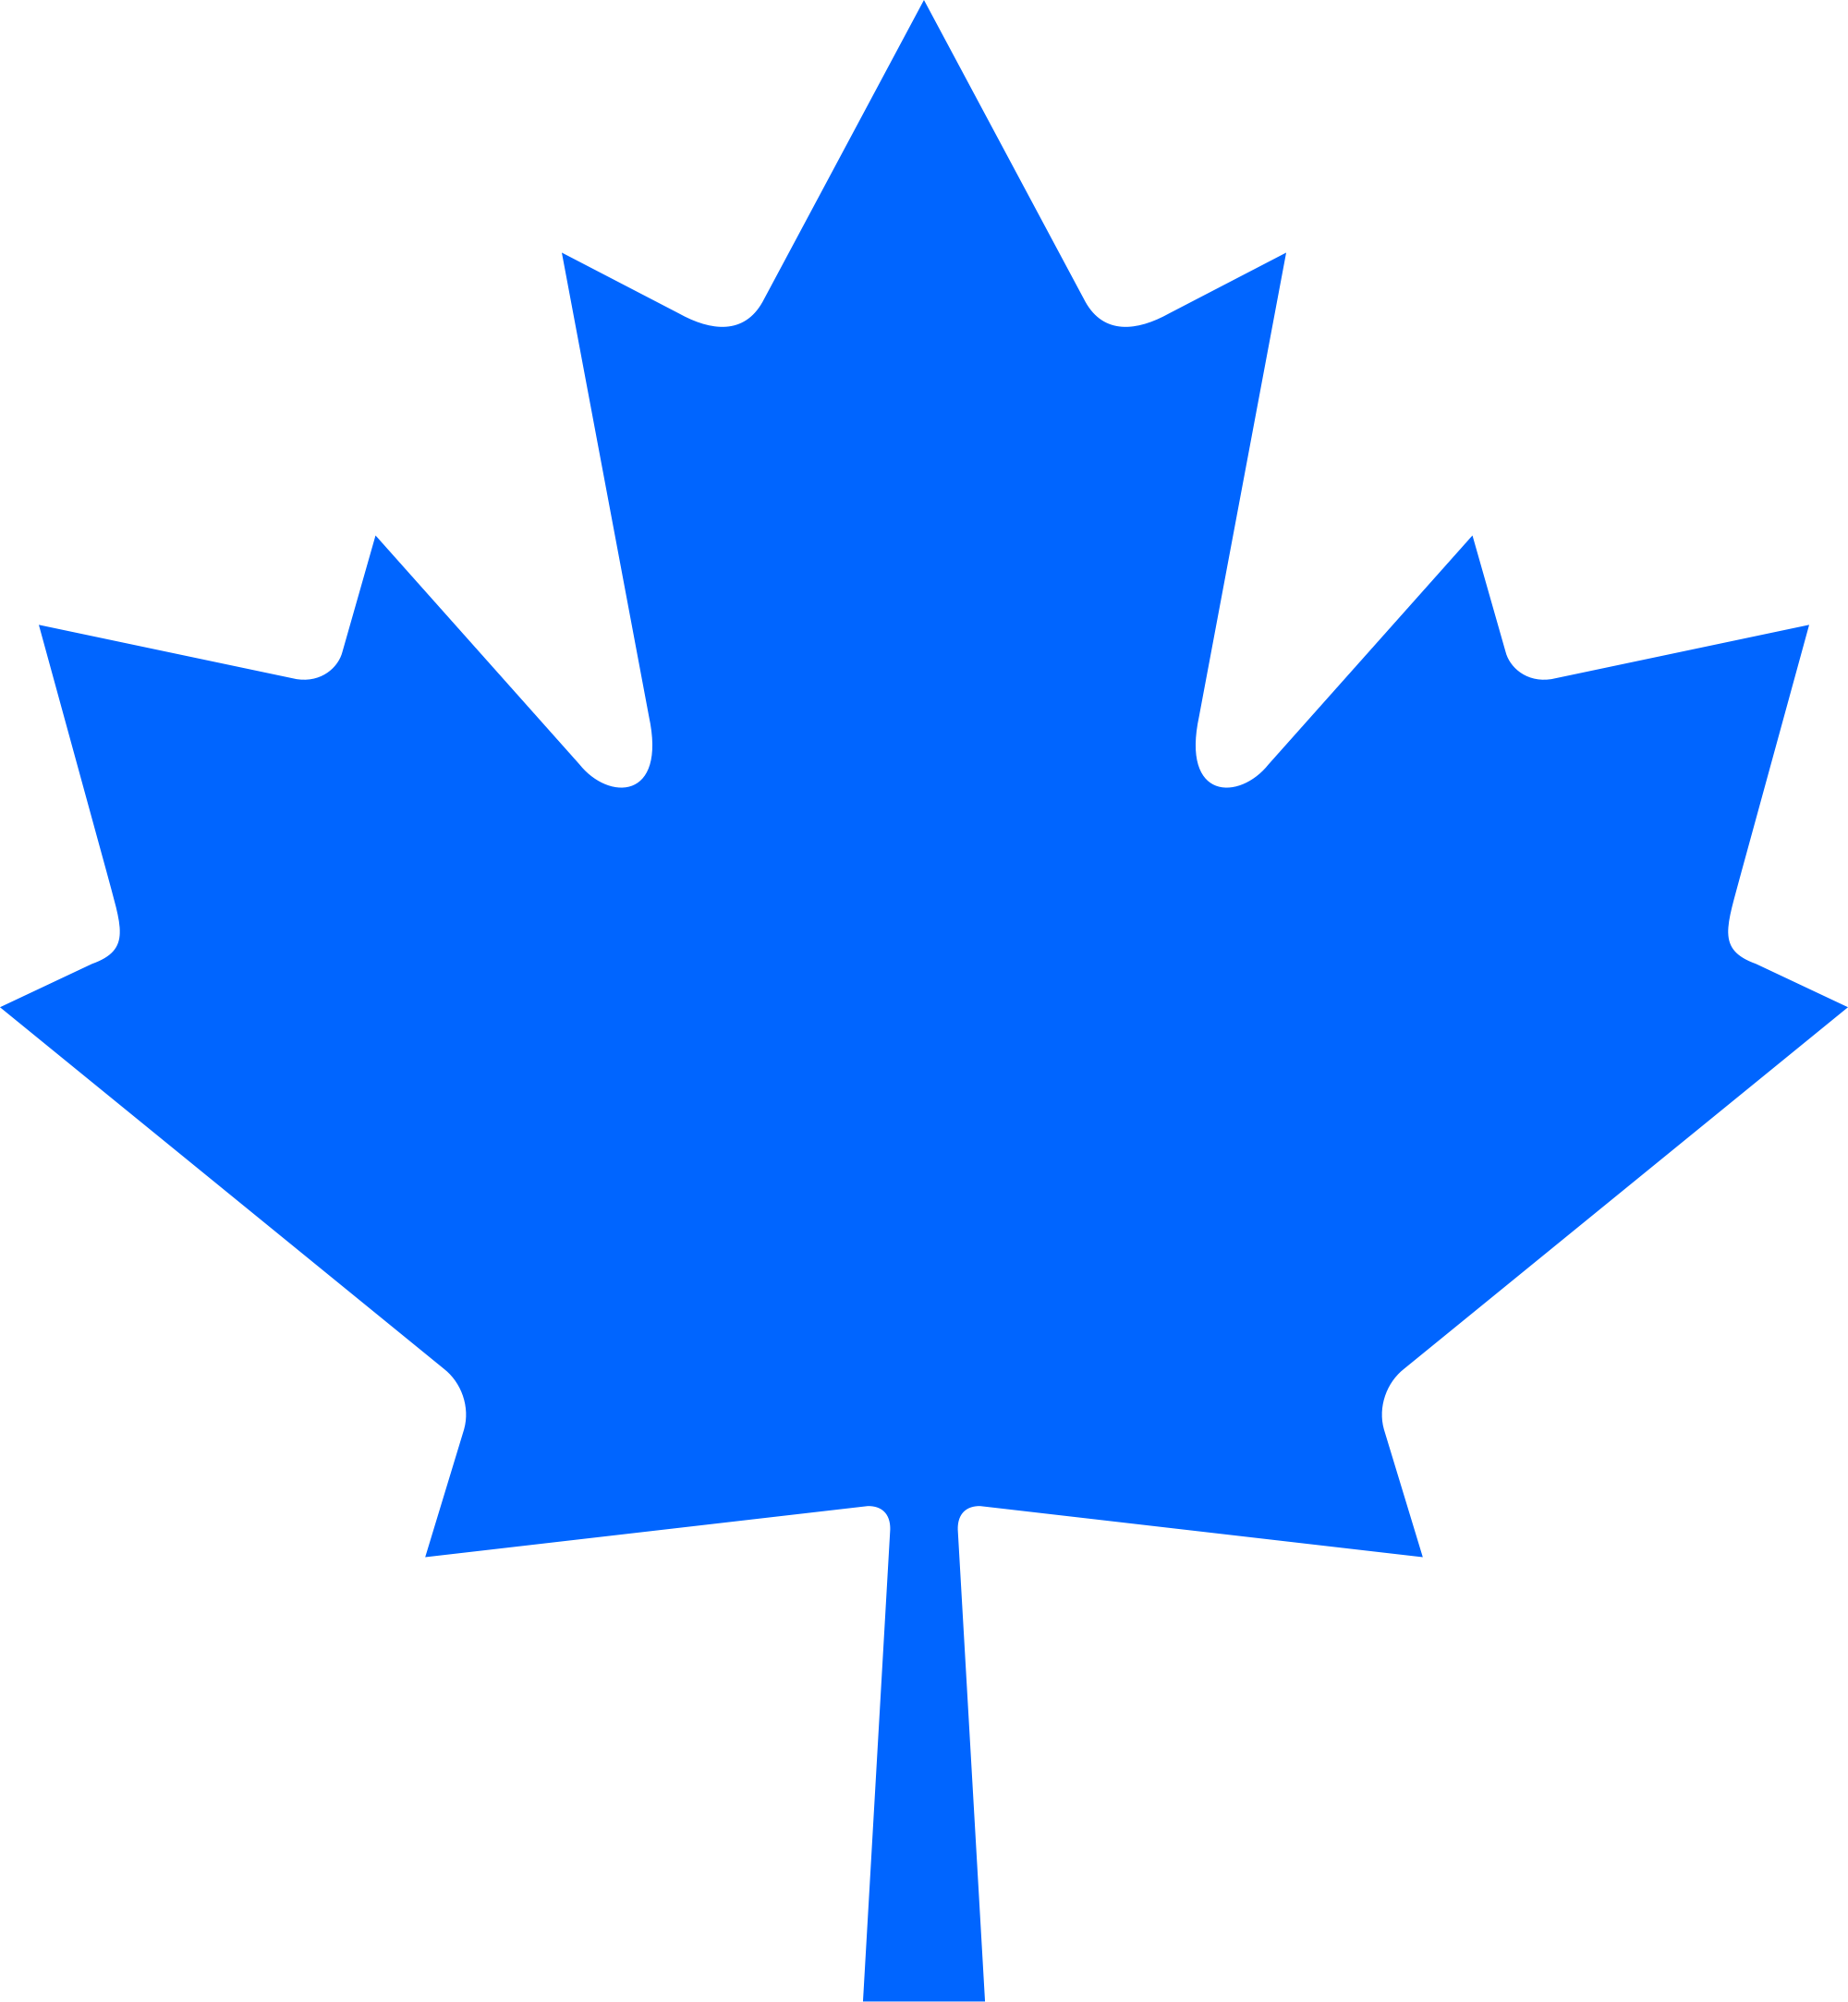 Conservative Maple Leaf, Blue - Canada Maple Leaf Blue (2000x2167)